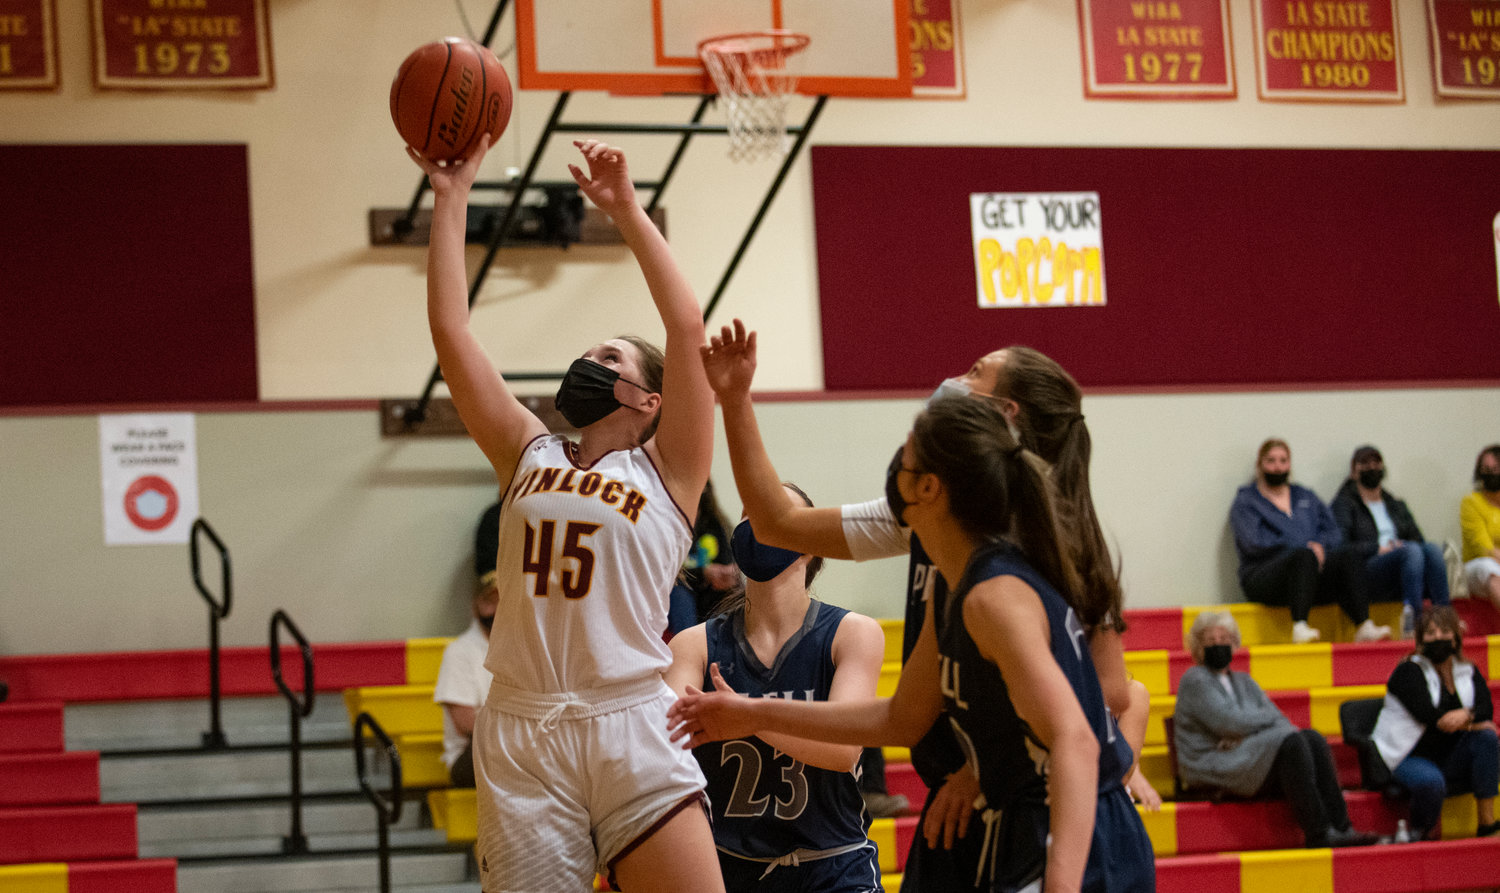 Winlock's Madison Vigre (45) takes it up for two points against Pe Ell.